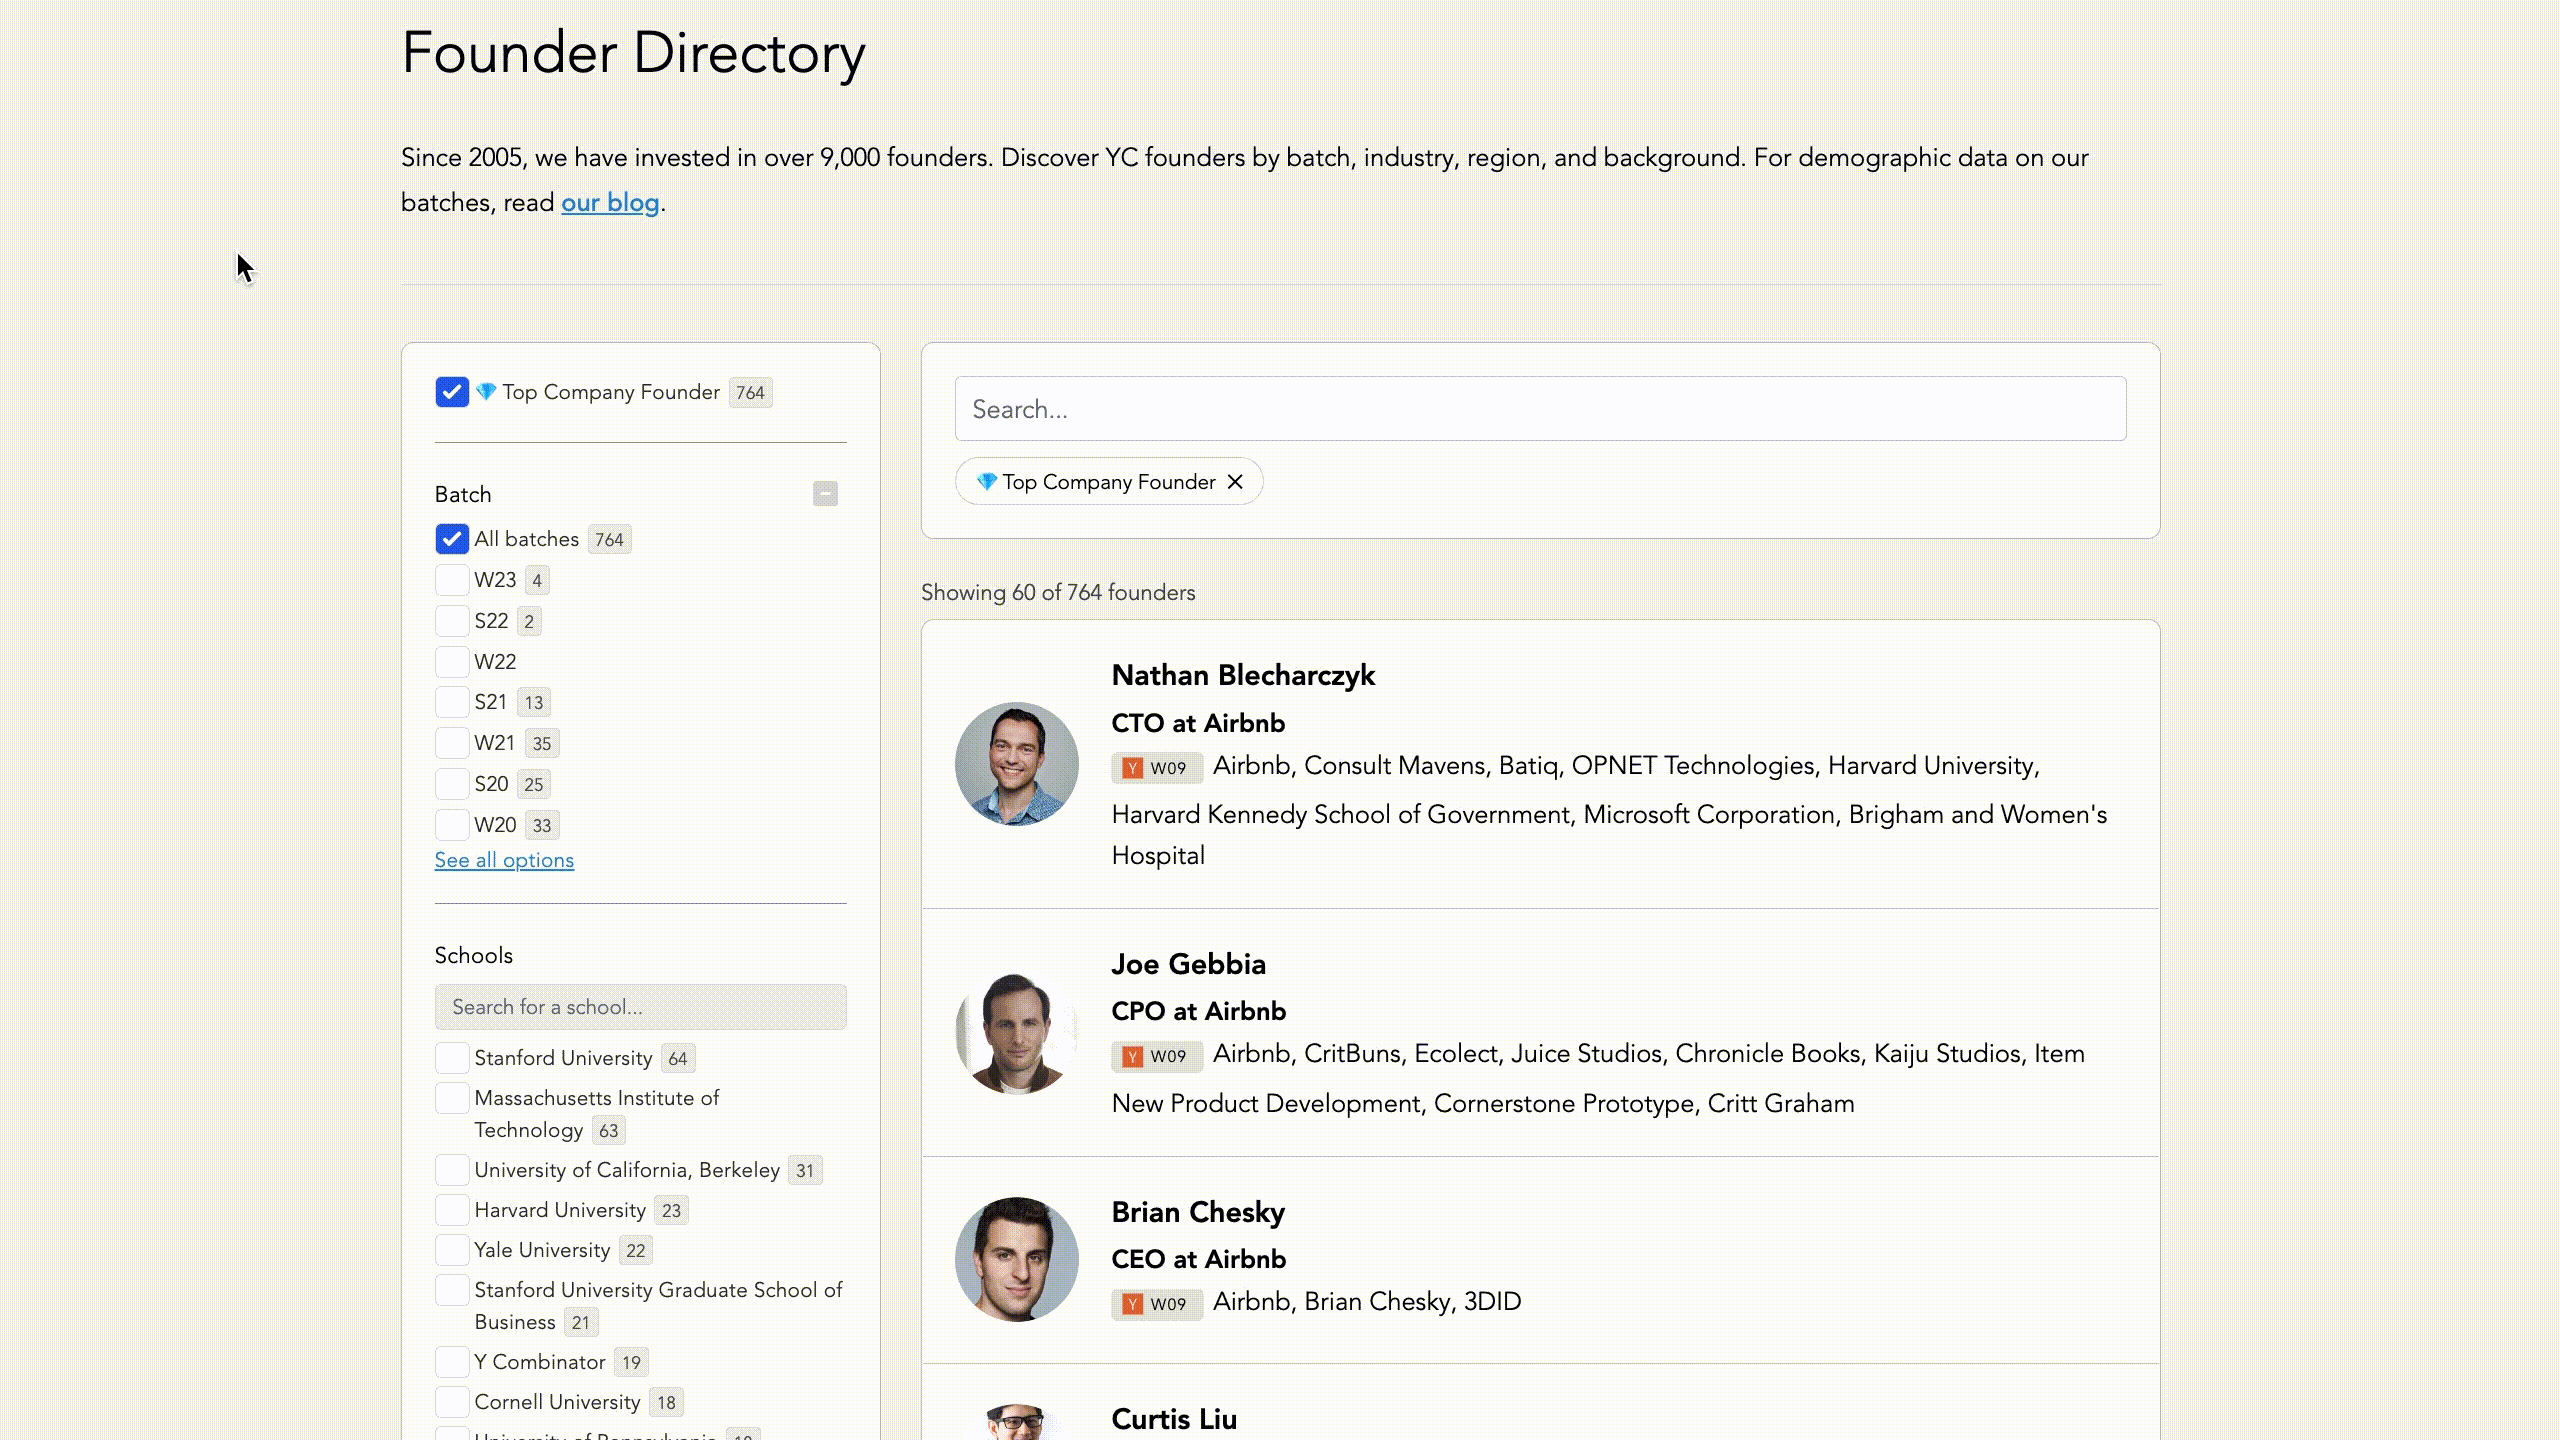 The YC Founder Directory (+ New Company Content)